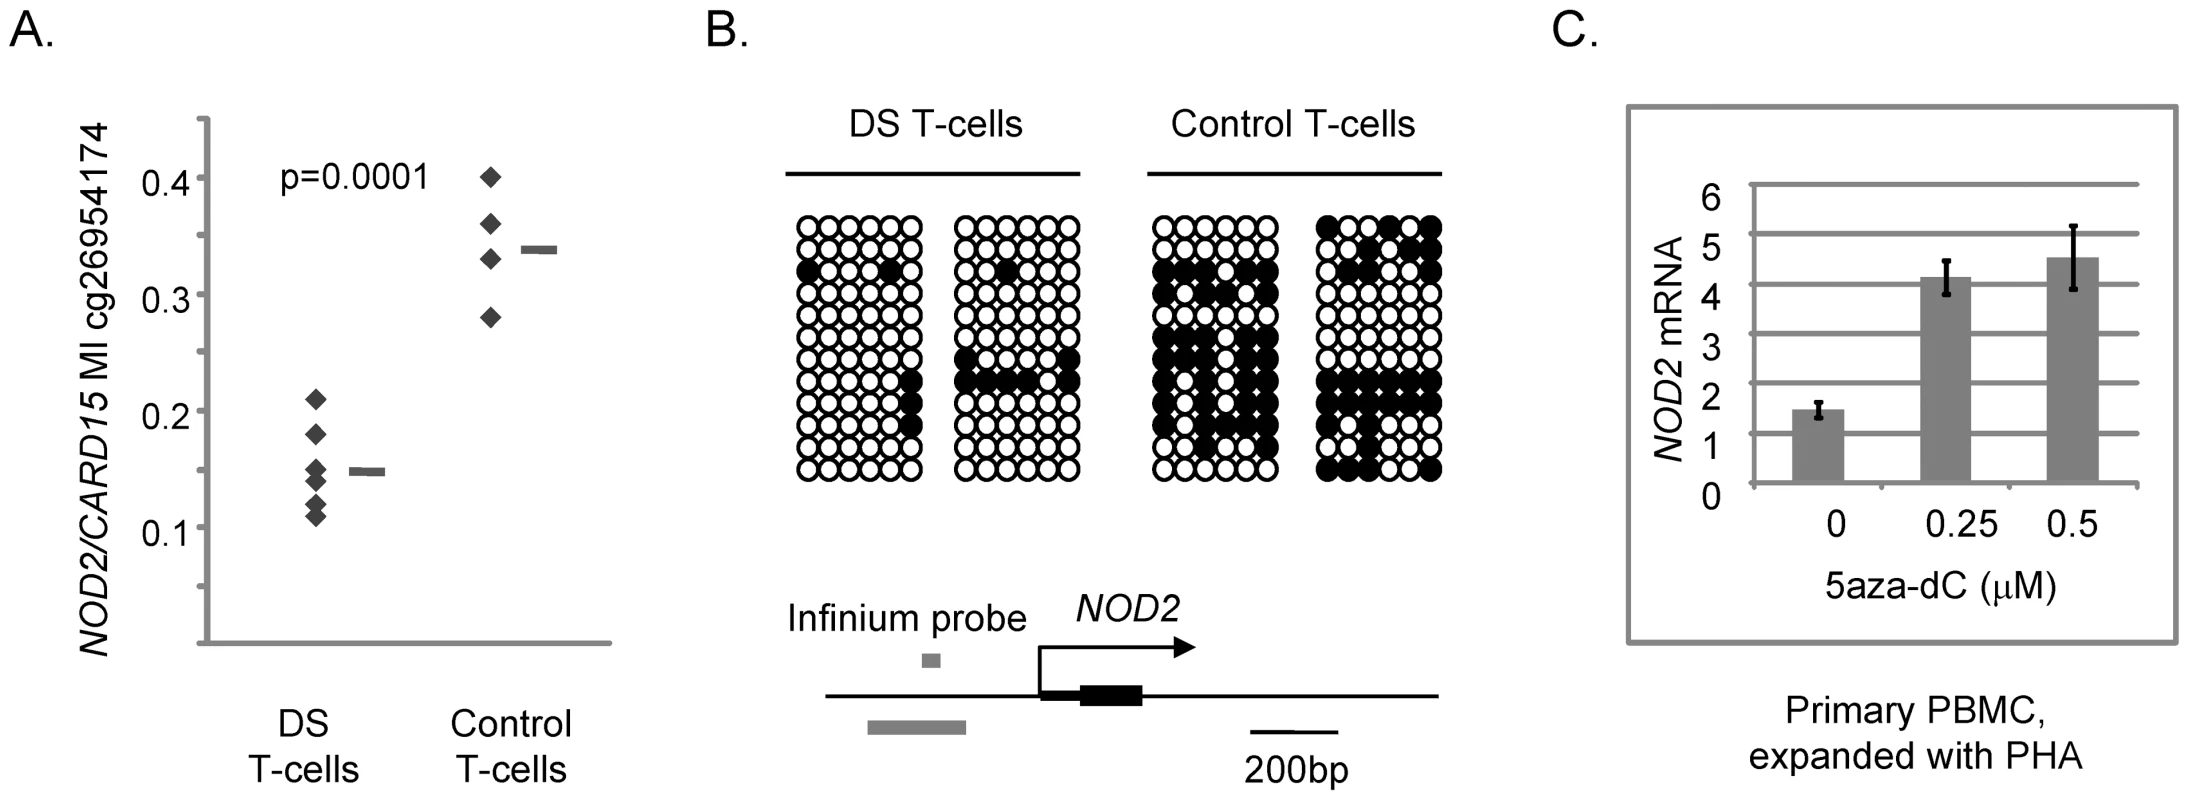 Differential DNA methylation in the <i>CARD15/NOD2</i> gene in DS versus normal T-cells and induction of <i>NOD2</i> mRNA by 5aza-dC.